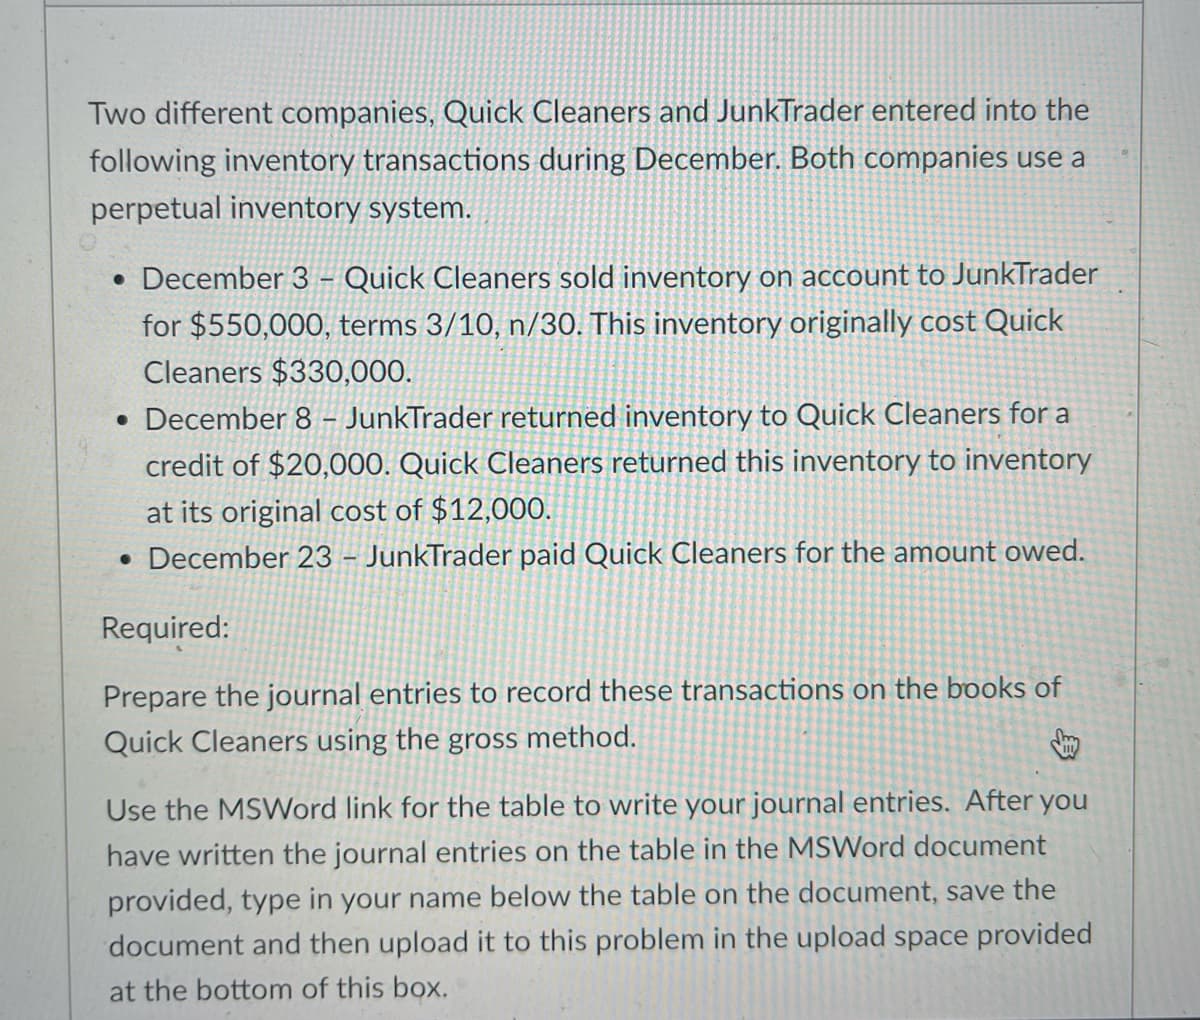 Two different companies, Quick Cleaners and JunkTrader entered into the
following inventory transactions during December. Both companies use a
perpetual inventory system.
• December 3 - Quick Cleaners sold inventory on account to JunkTrader
for $550,000, terms 3/10, n/30. This inventory originally cost Quick
Cleaners $330,000.
. December 8 - JunkTrader returned inventory to Quick Cleaners for a
credit of $20,000. Quick Cleaners returned this inventory to inventory
at its original cost of $12,000.
December 23 - JunkTrader paid Quick Cleaners for the amount owed.
Required:
Prepare the journal entries to record these transactions on the books of
Quick Cleaners using the gross method.
Use the MSWord link for the table to write your journal entries. After you
have written the journal entries on the table in the MSWord document
provided, type in your name below the table on the document, save the
document and then upload it to this problem in the upload space provided
at the bottom of this box.